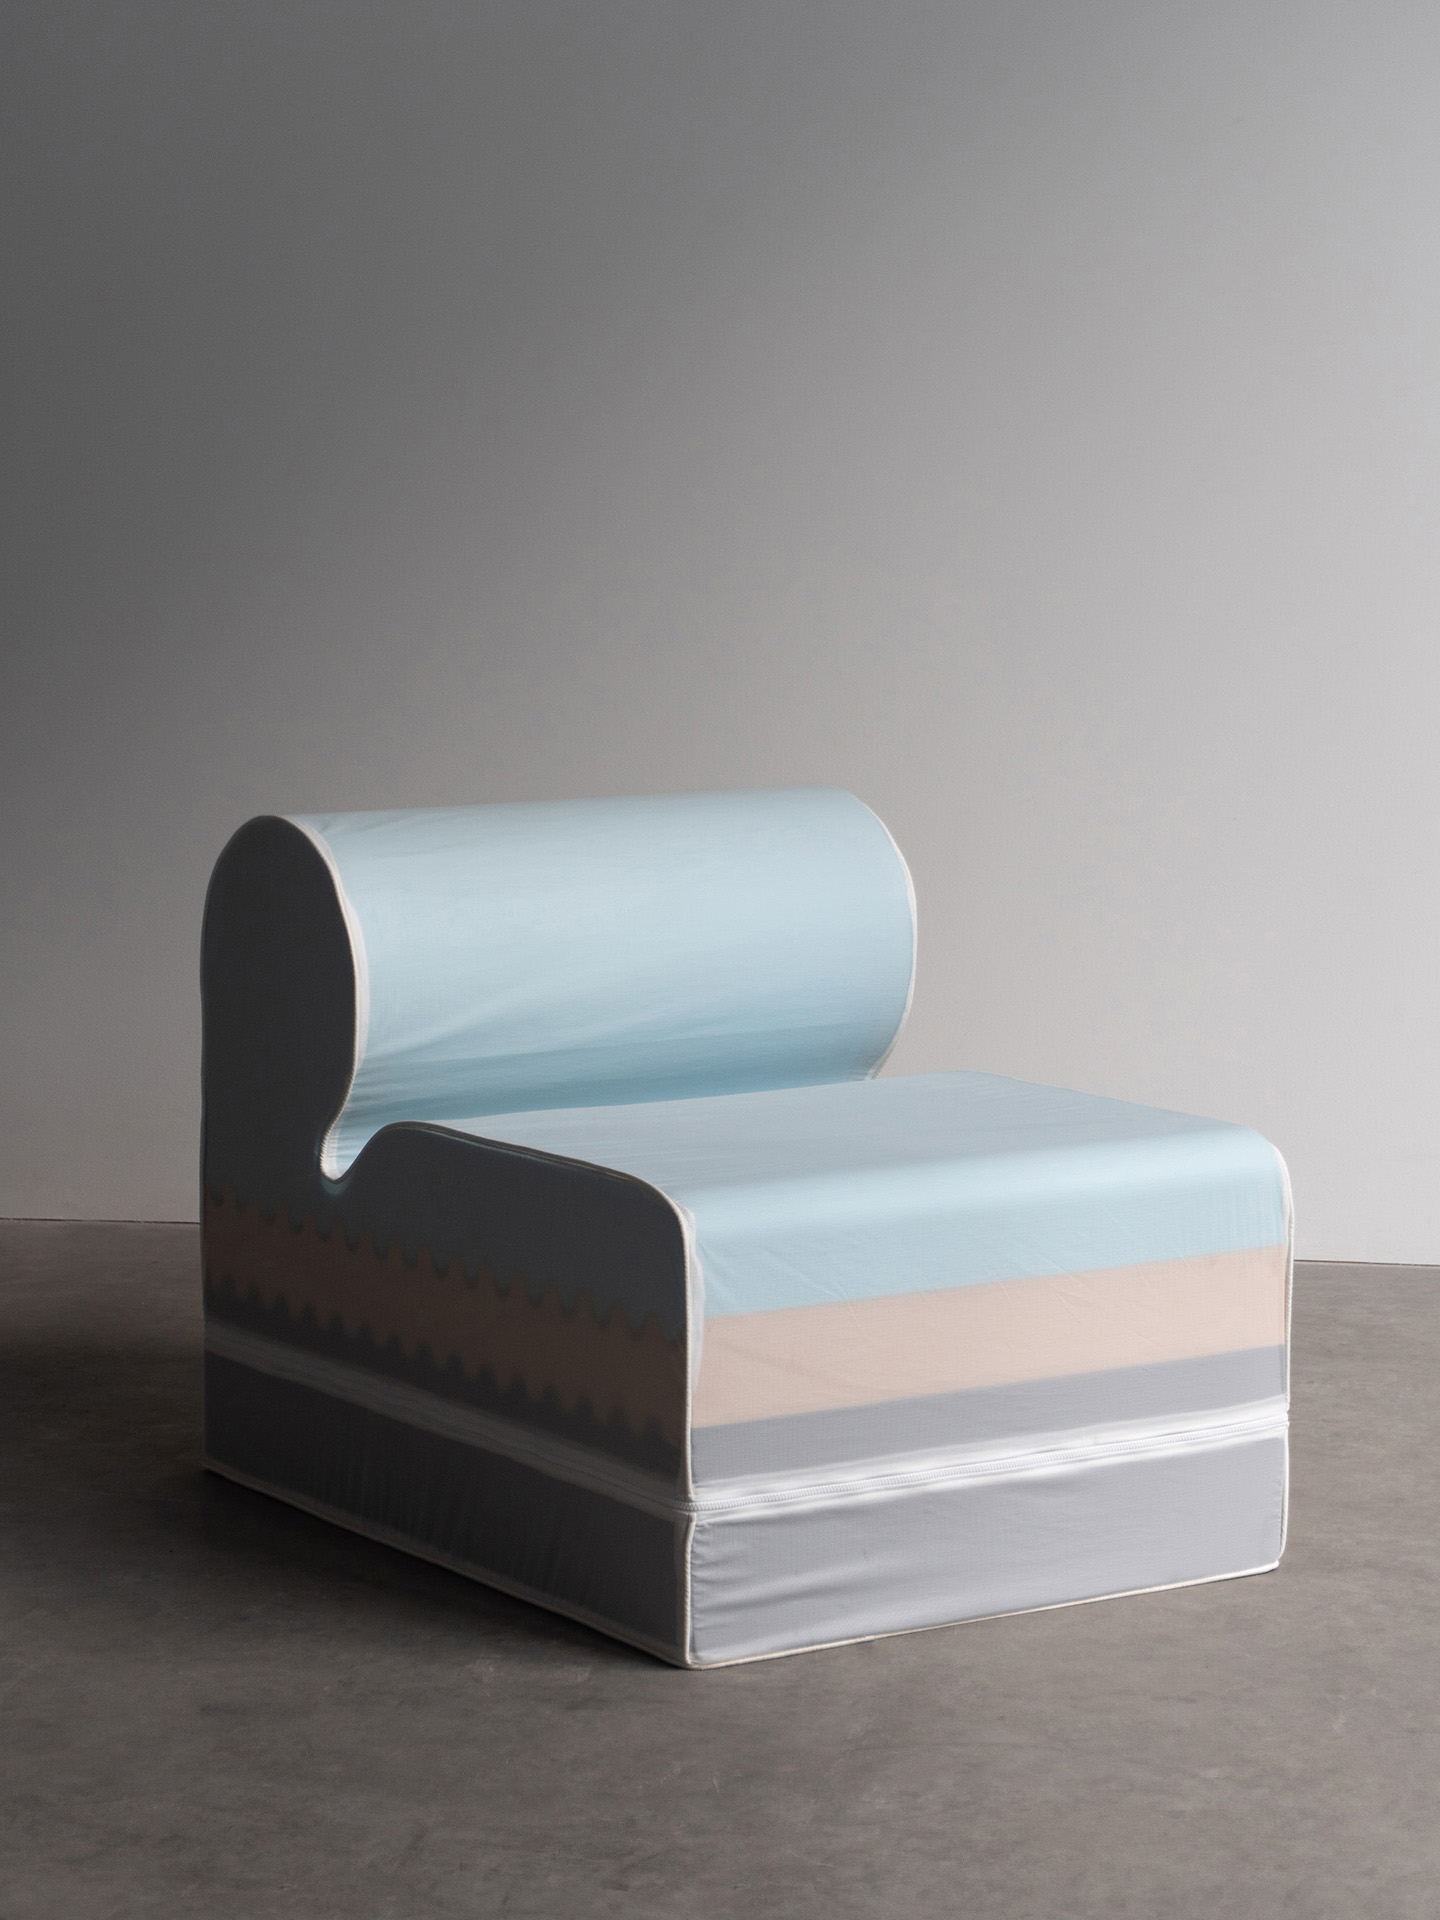 http://designwanted.com/wp-content/uploads/2021/11/1.-Cutted-Clouds-by-Finemateria-_-polyurethane-foam-sofa.jpeg